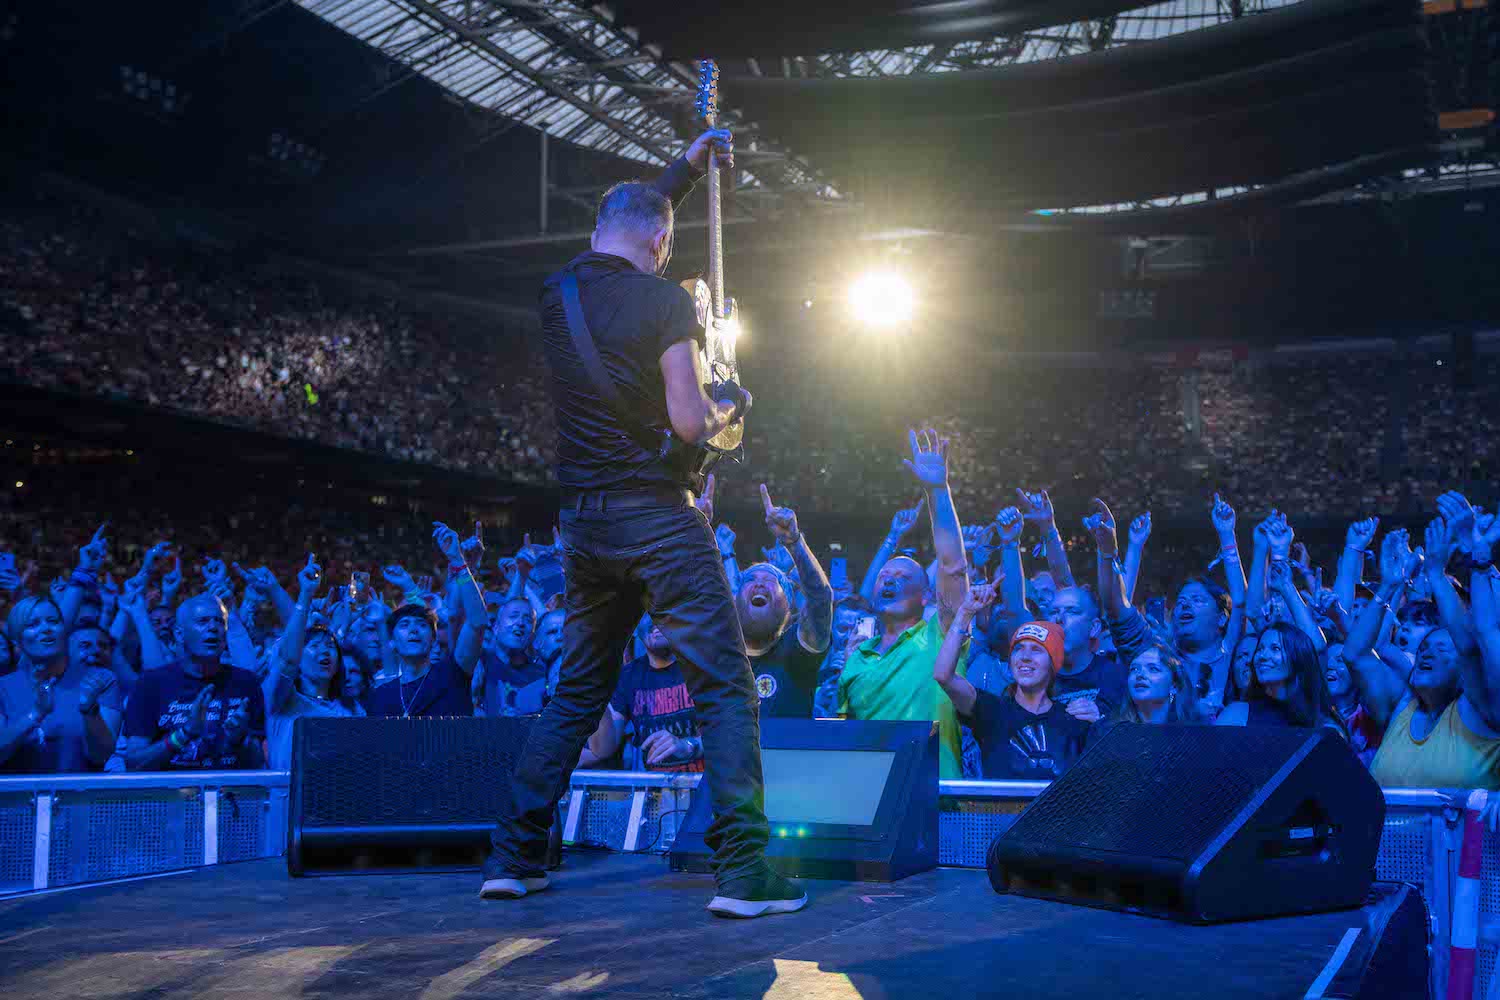 Bruce Springsteen & E Street Band at Johan Cruijff ArenA, Amsterdam, The Netherlands on May 27, 2023.